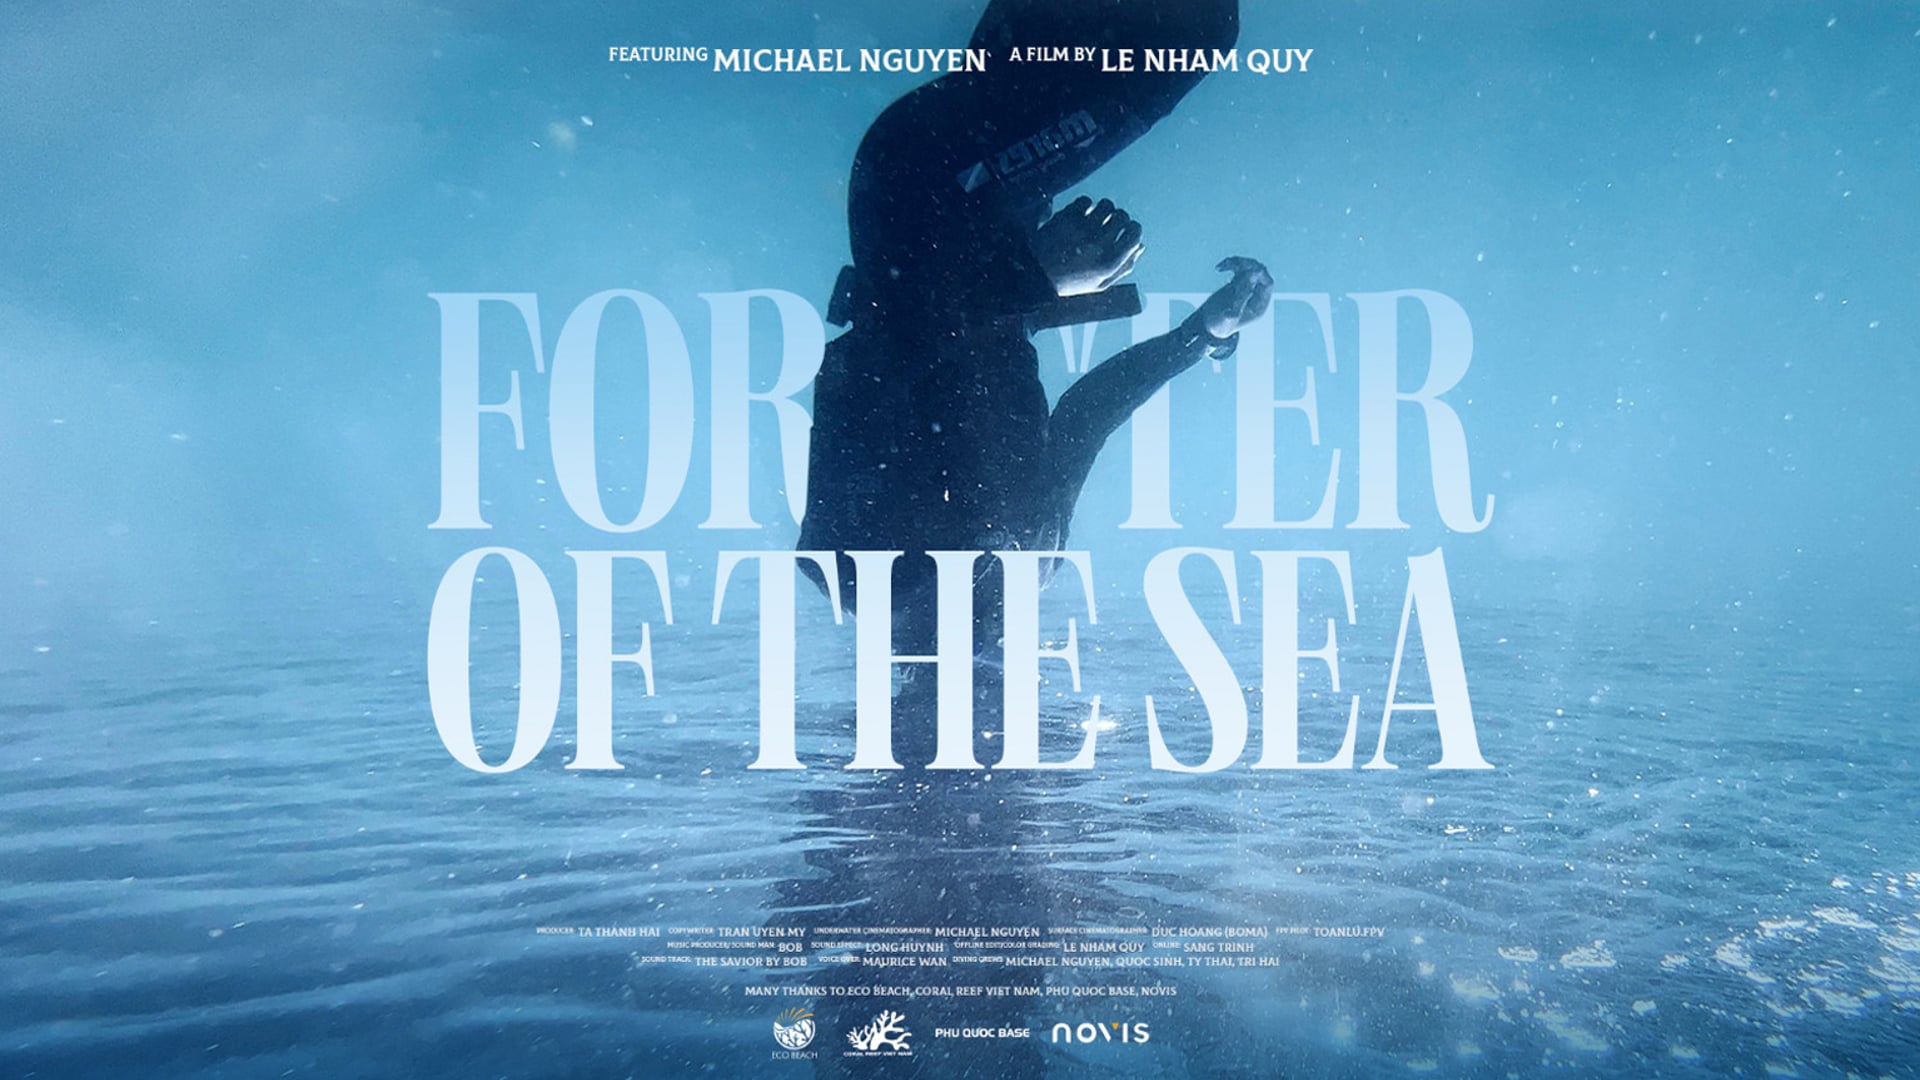 FORESTER OF THE SEA